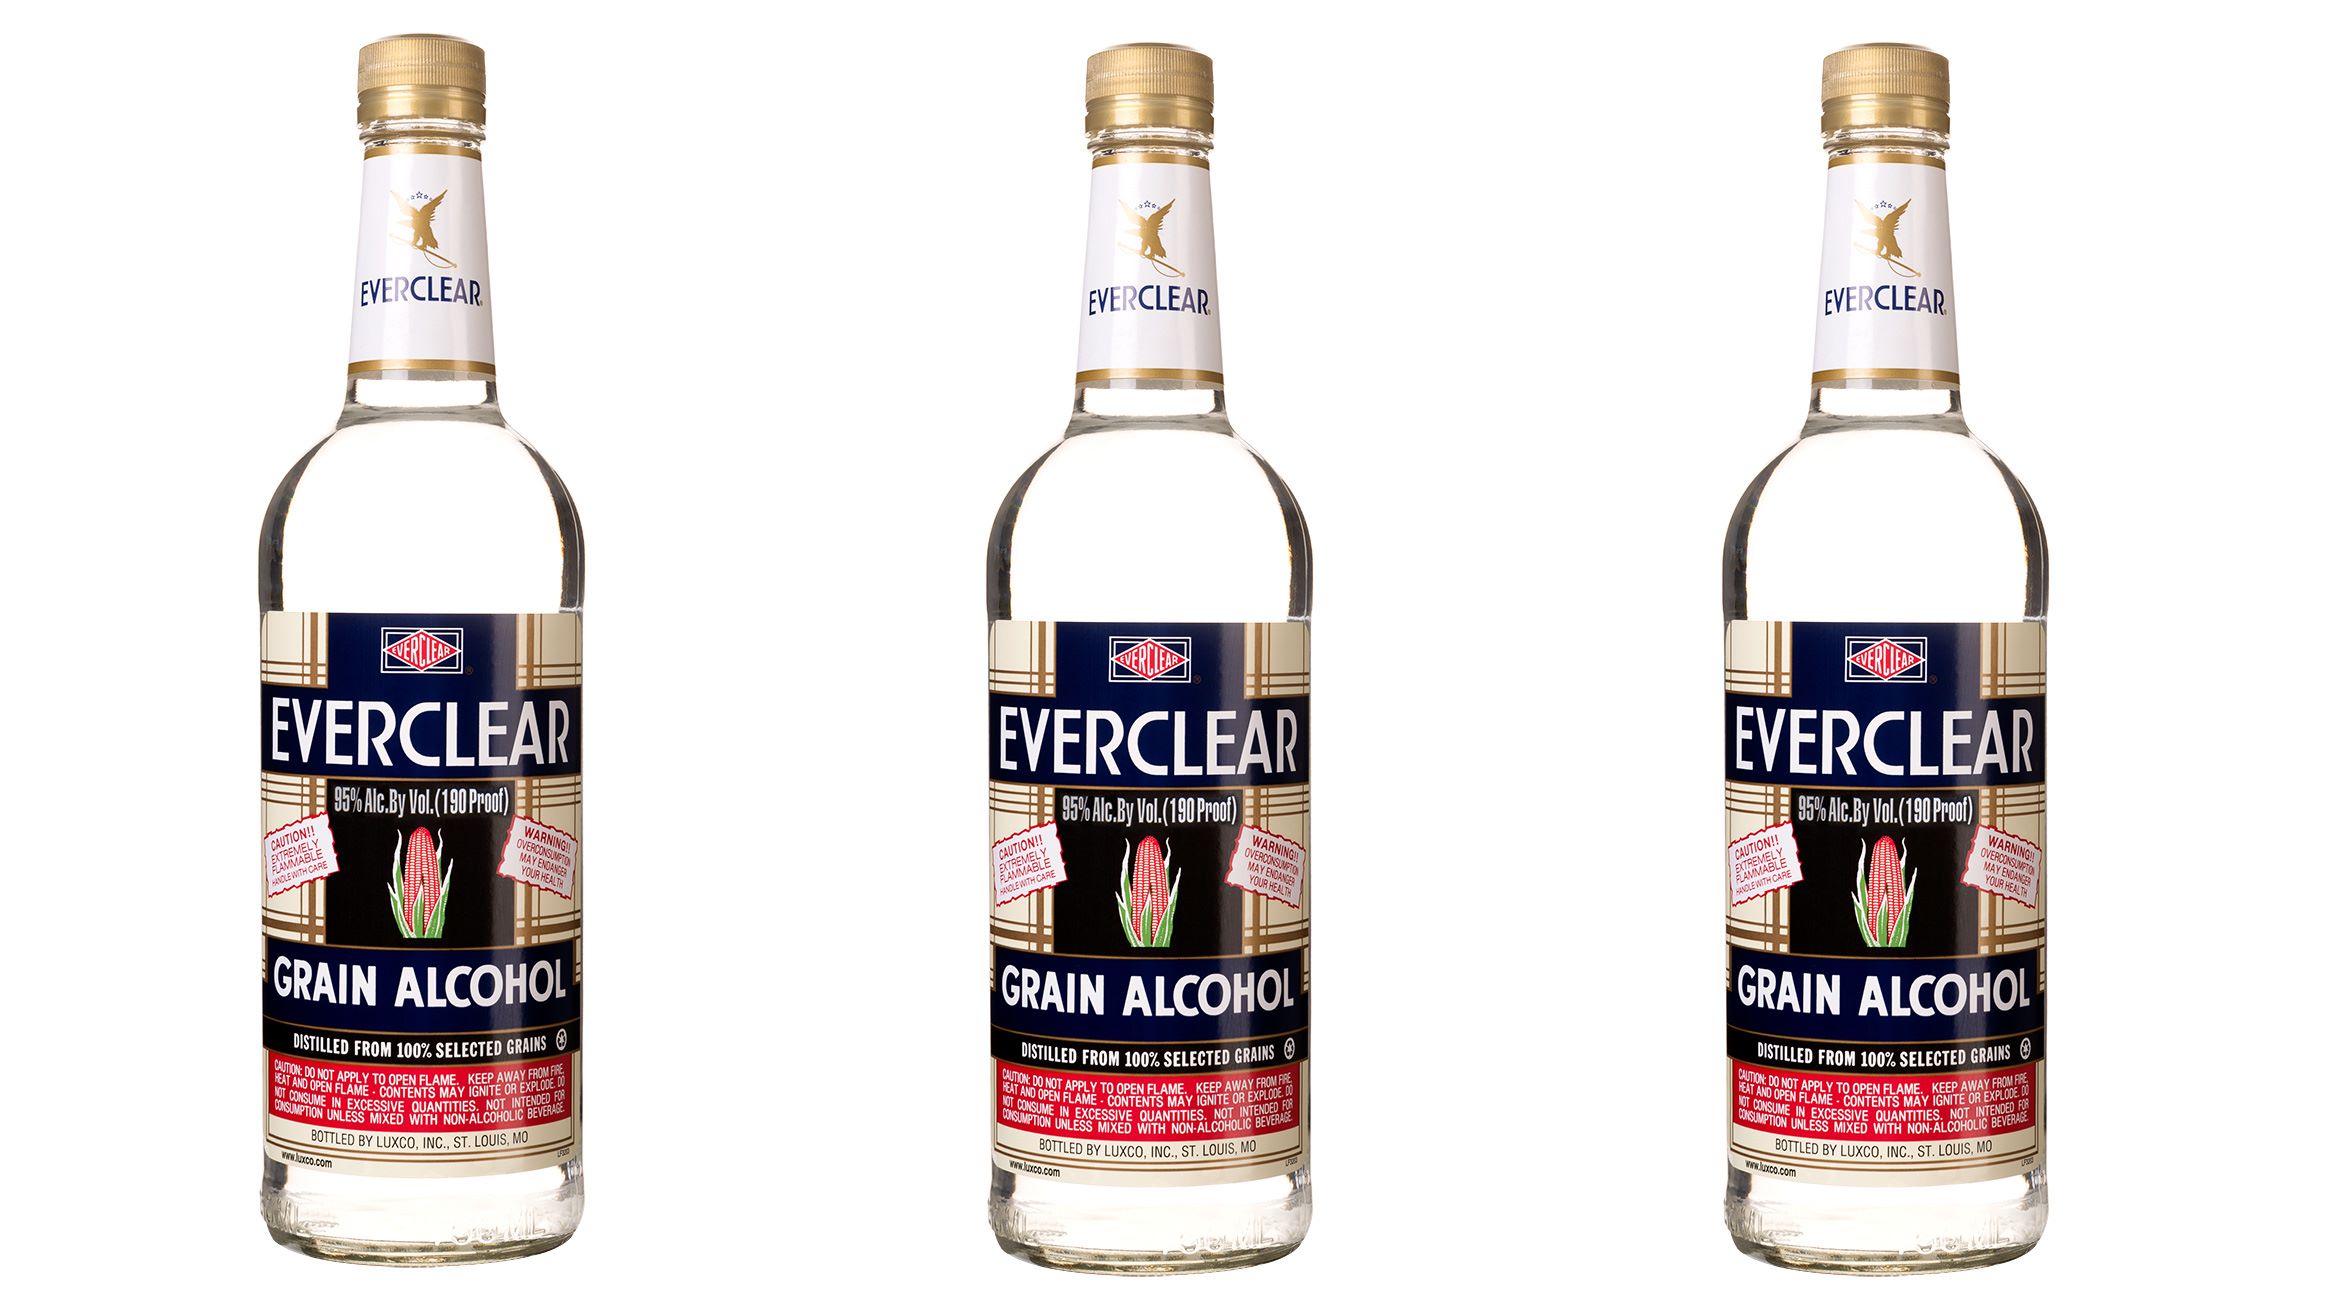 You Won't Believe What Everclear Really Is!